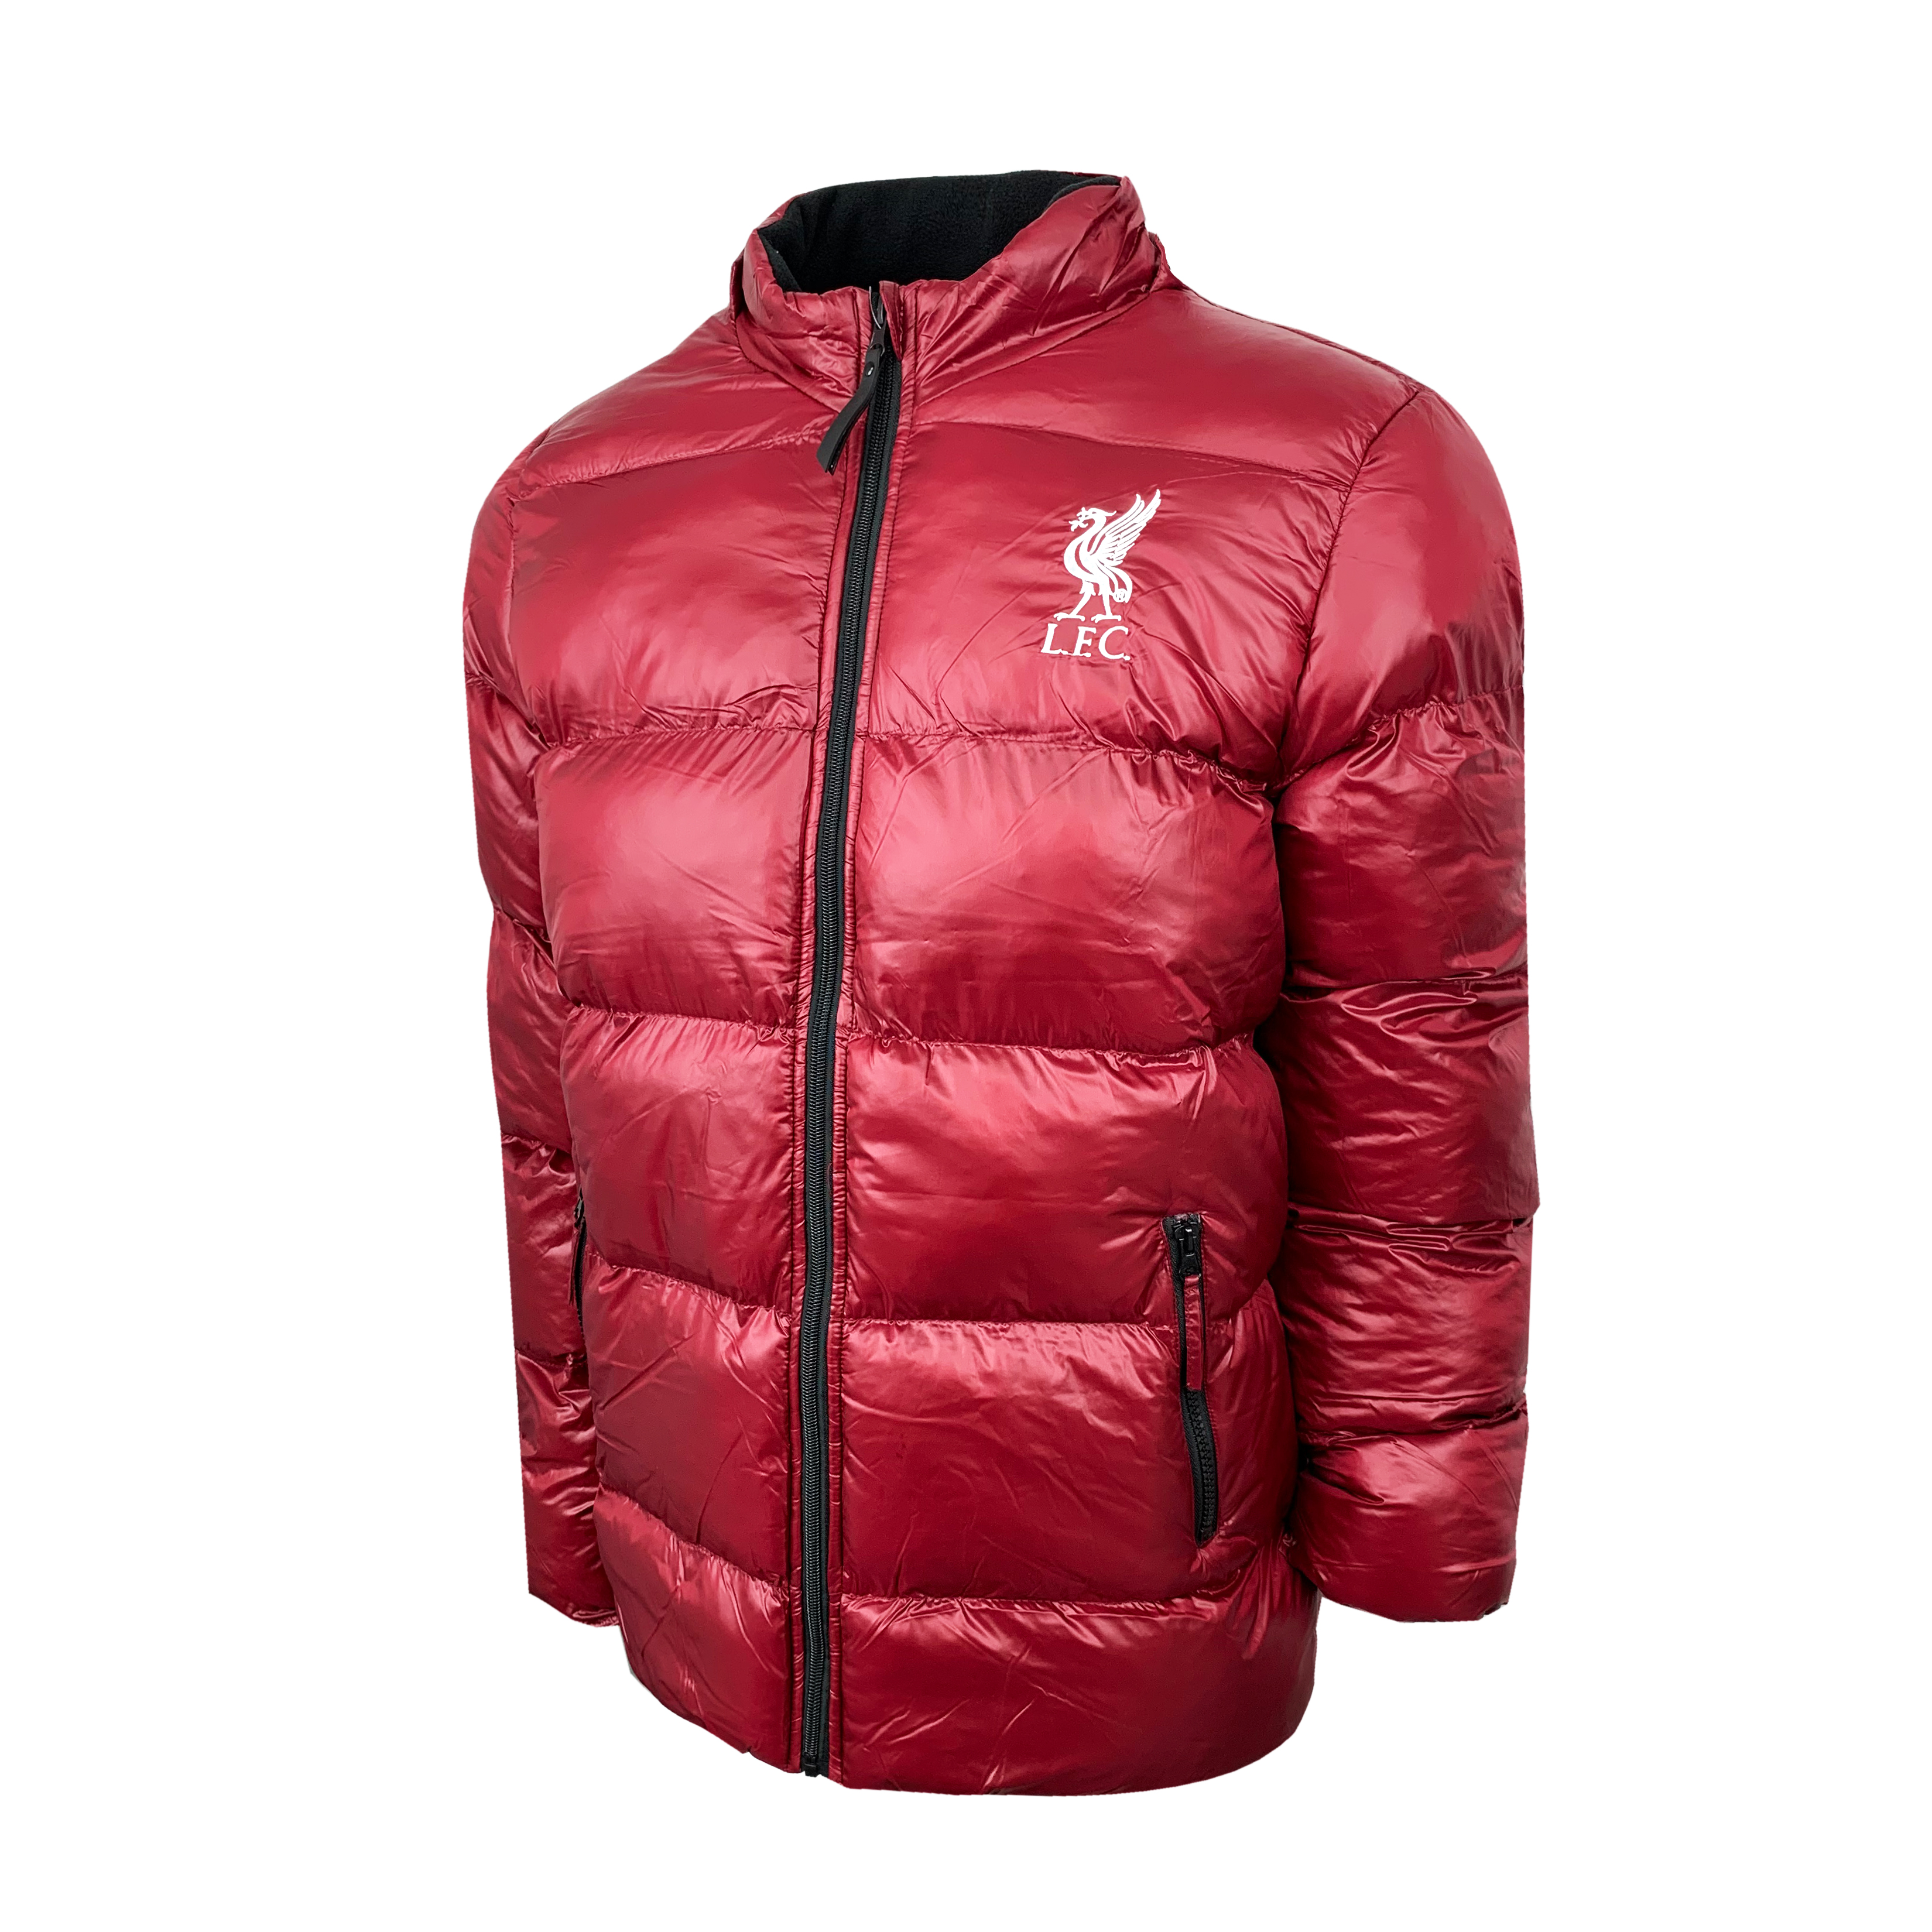 Liverpool Winter Jacket, With Removable Hood, Licensed Liverpool Puffer Jacket (YL) - image 5 of 5